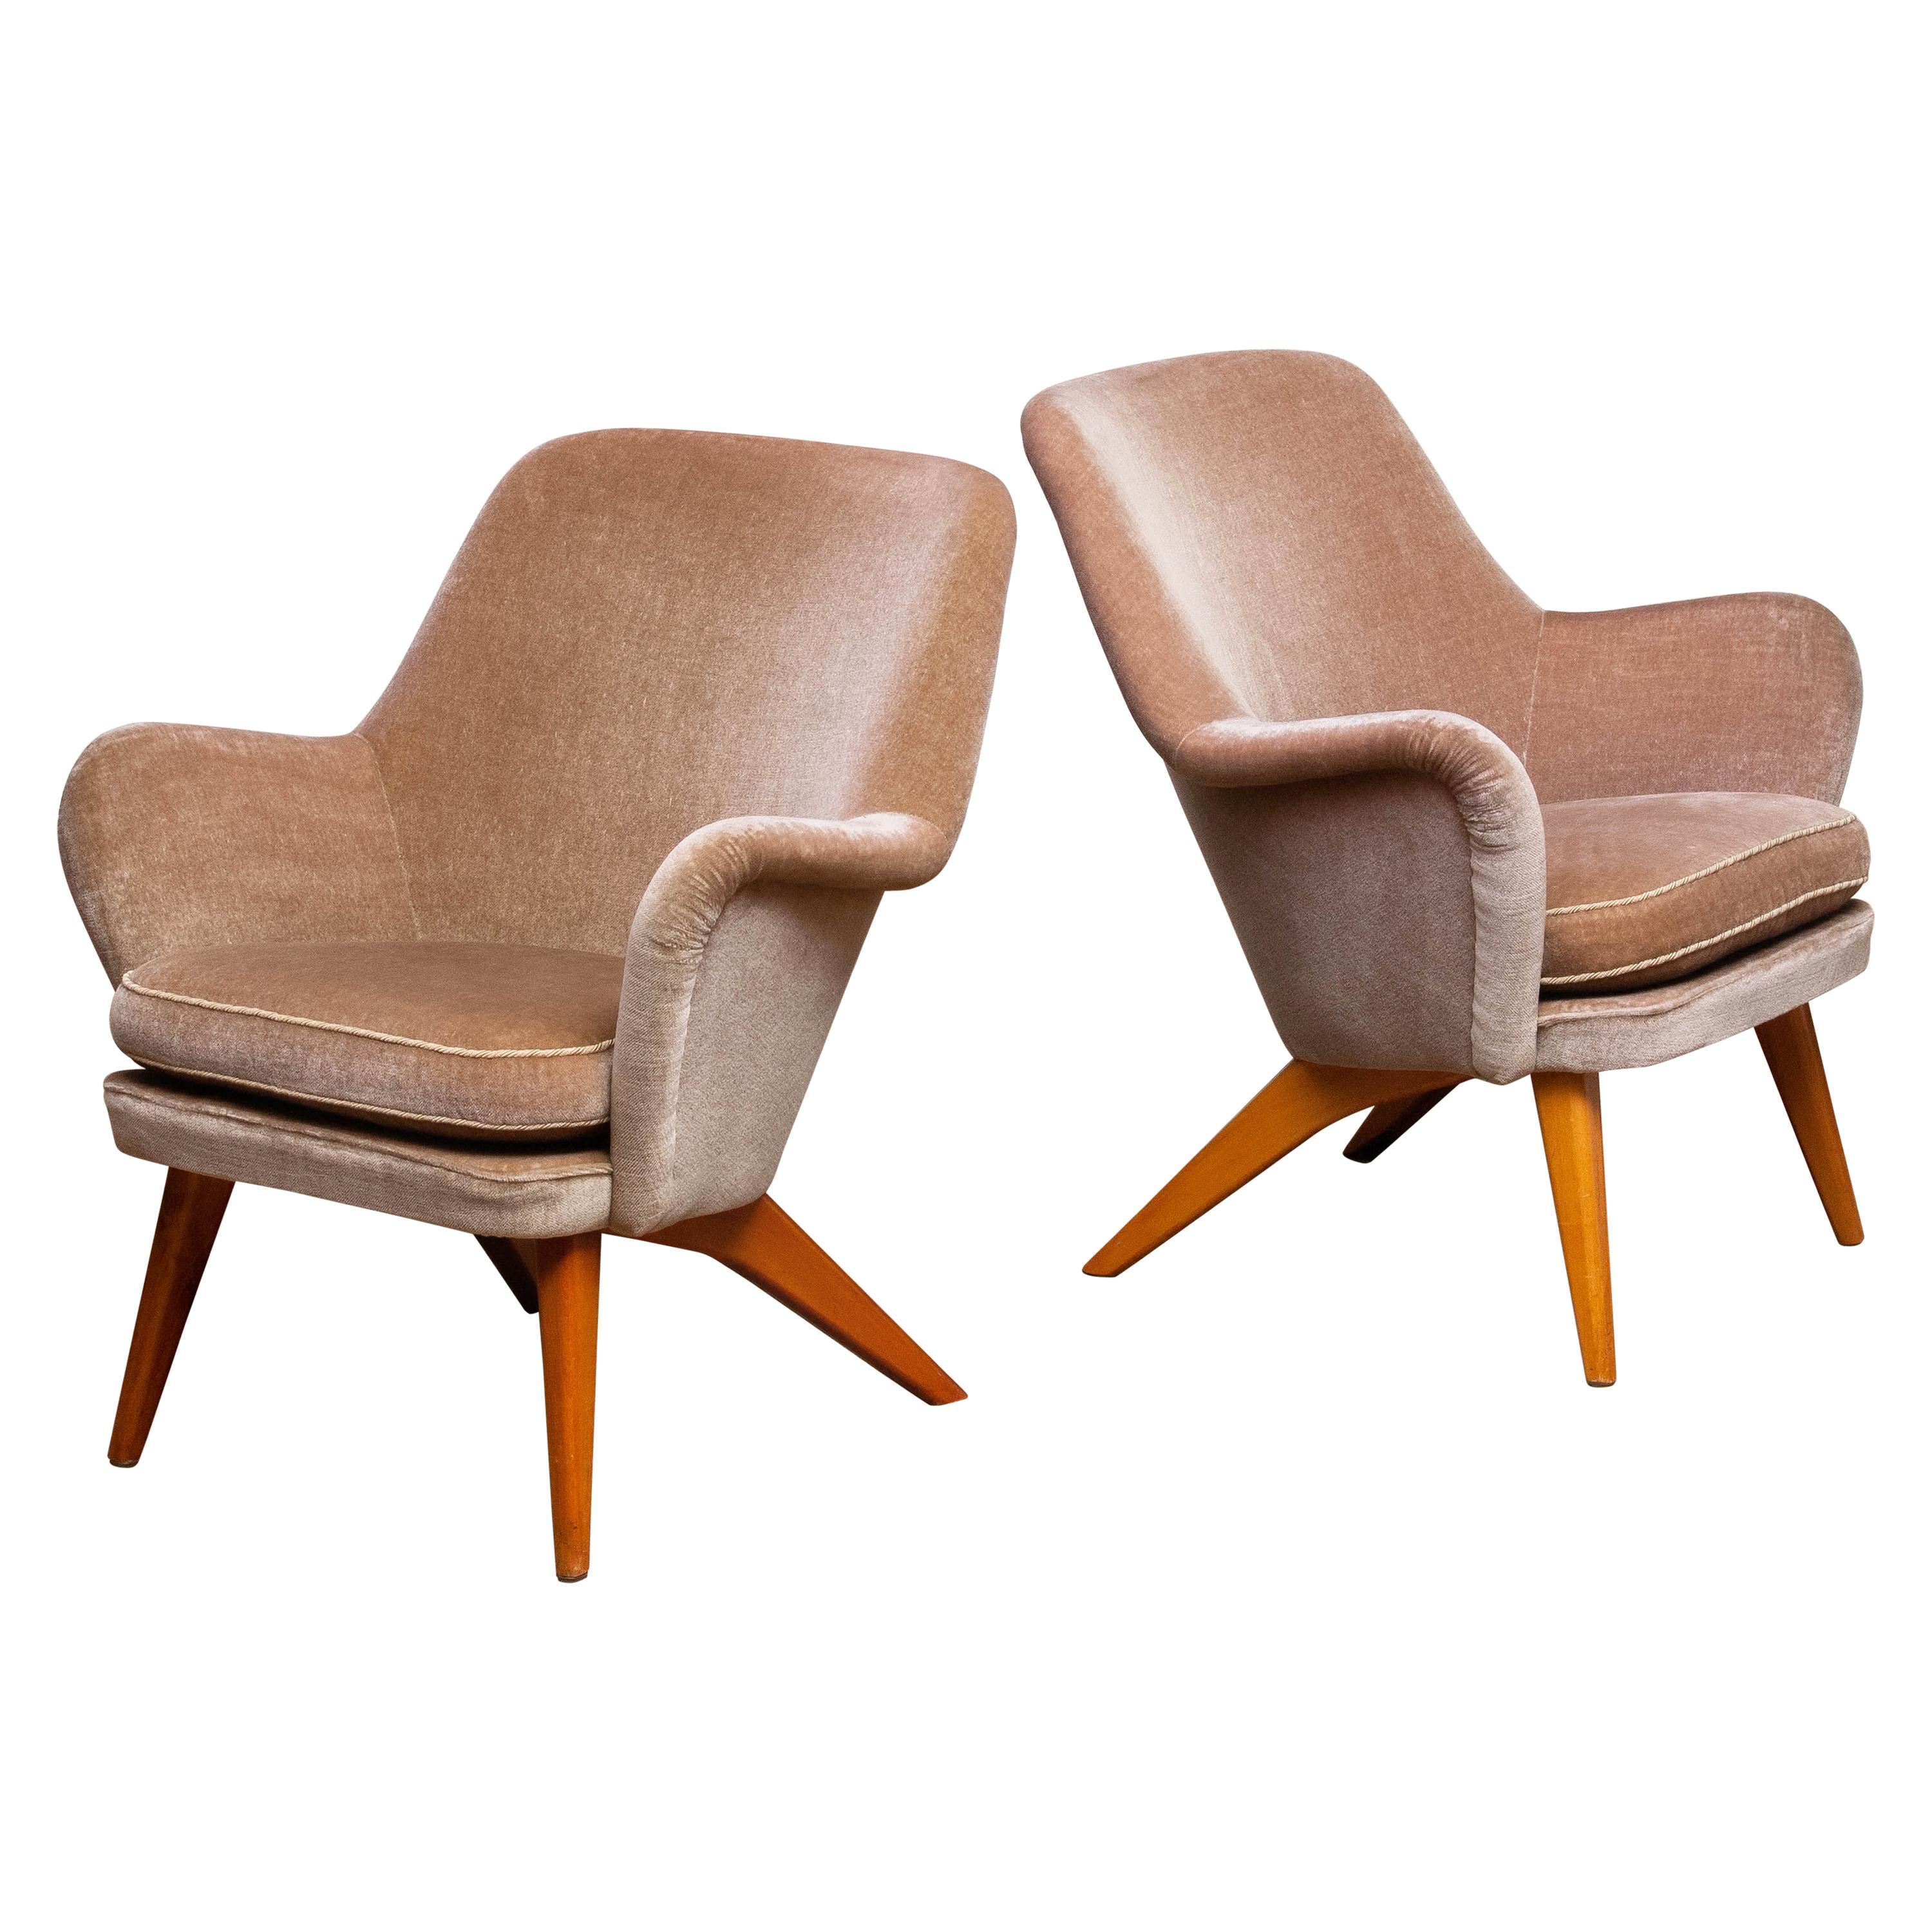 1950s a Pair of Pedro Chairs by Carl Gustav Hiort af Ornäs, Finland In Good Condition In Silvolde, Gelderland